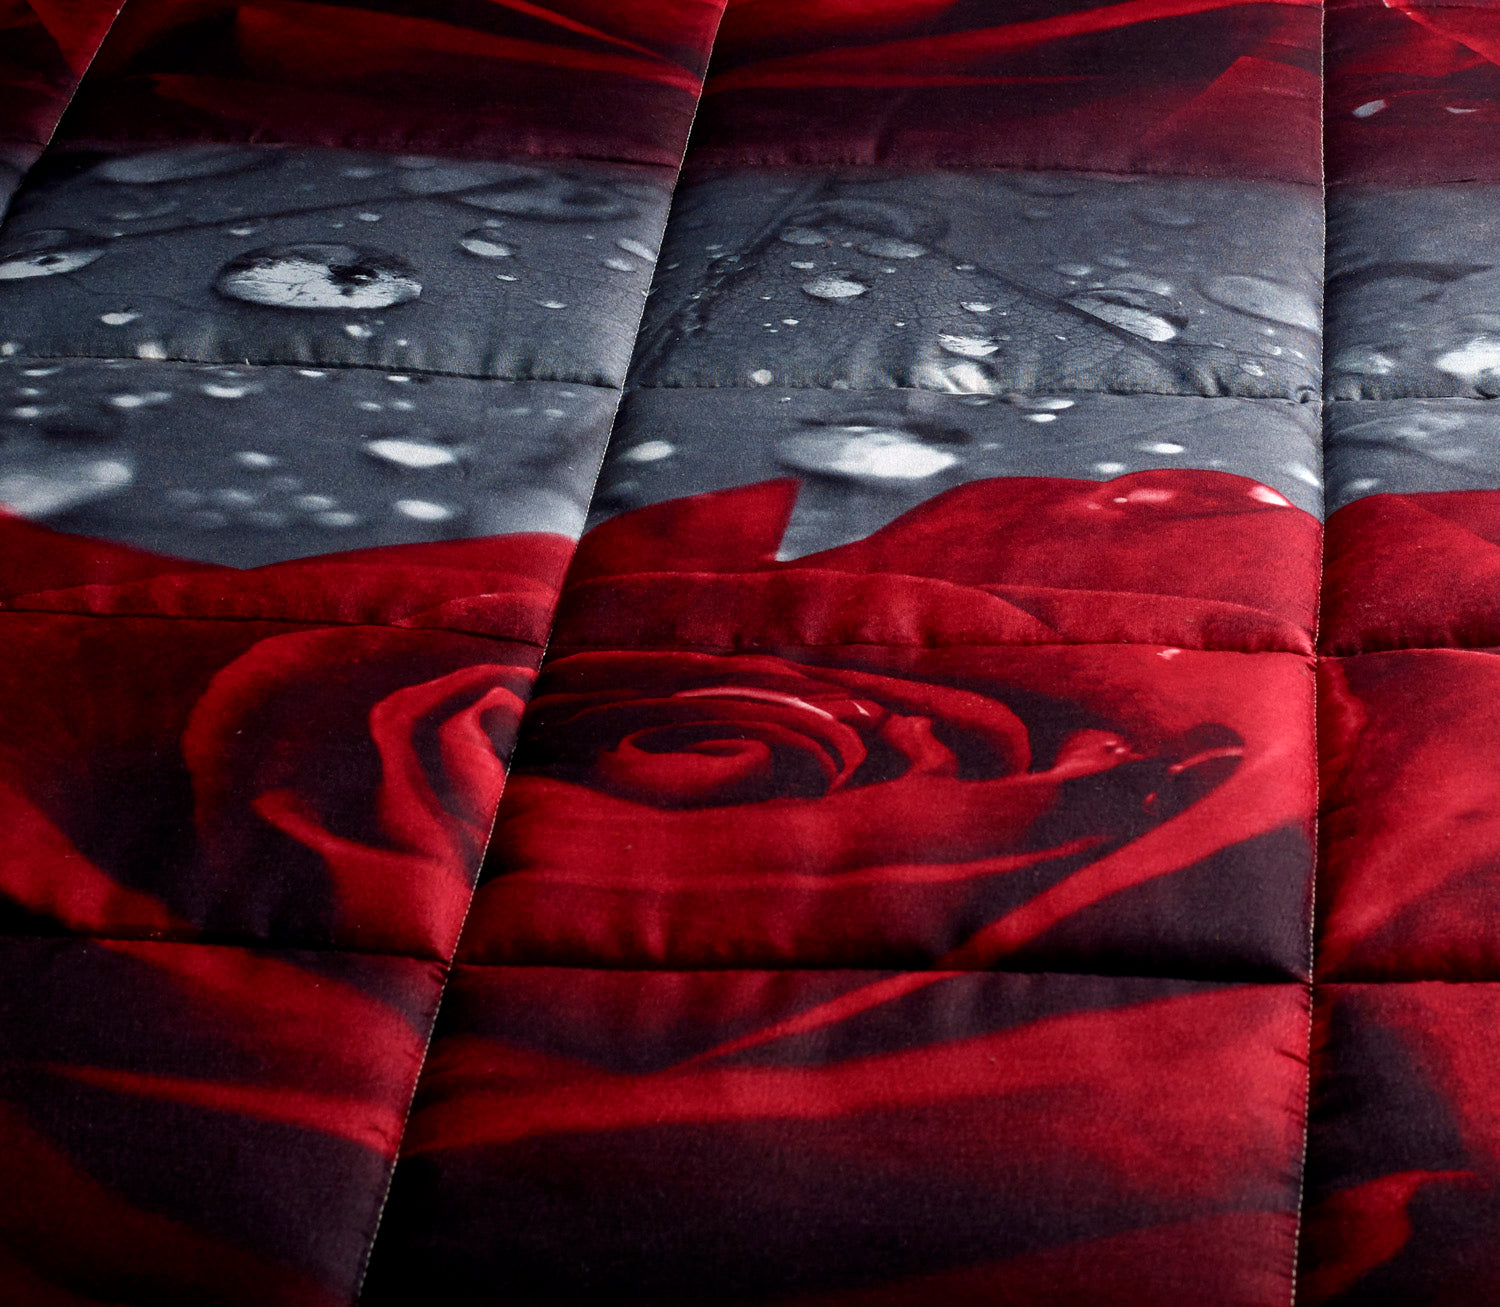 PASSIONATE ROSE ALTERNATIVE DOWN 3PC PRINTED COMFORTER. PERFECT FOR ANY SEASON. ULTRA SOFT MICROFIBER COVER